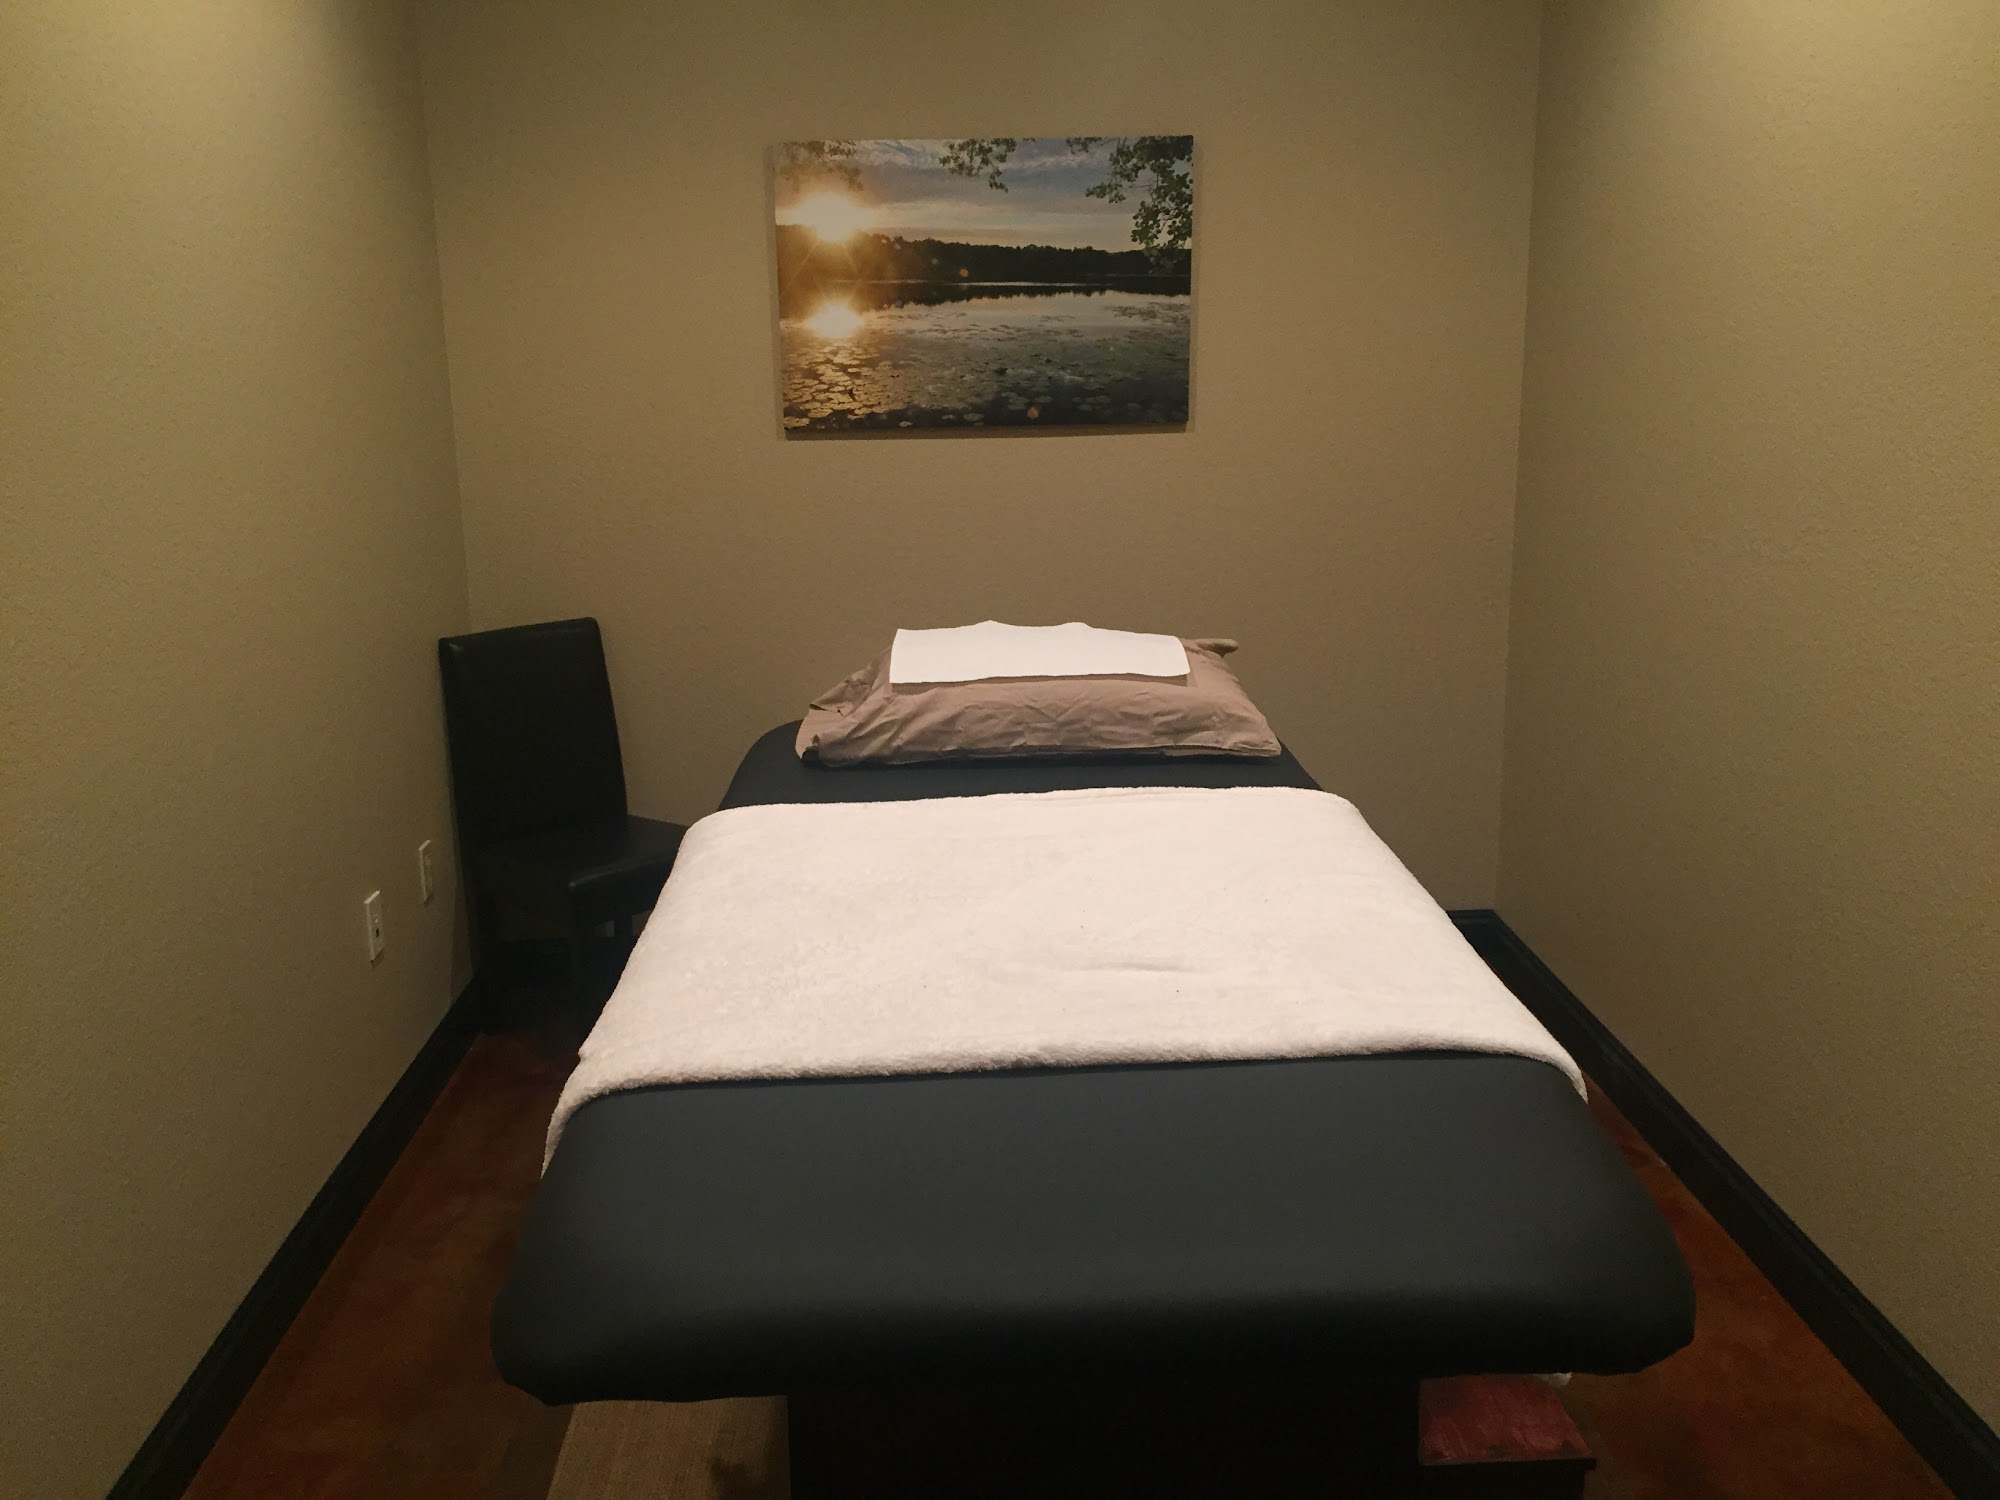 Lake Country Acupuncture W307 N1497, Golf Rd Ste 104, Delafield Wisconsin 53018